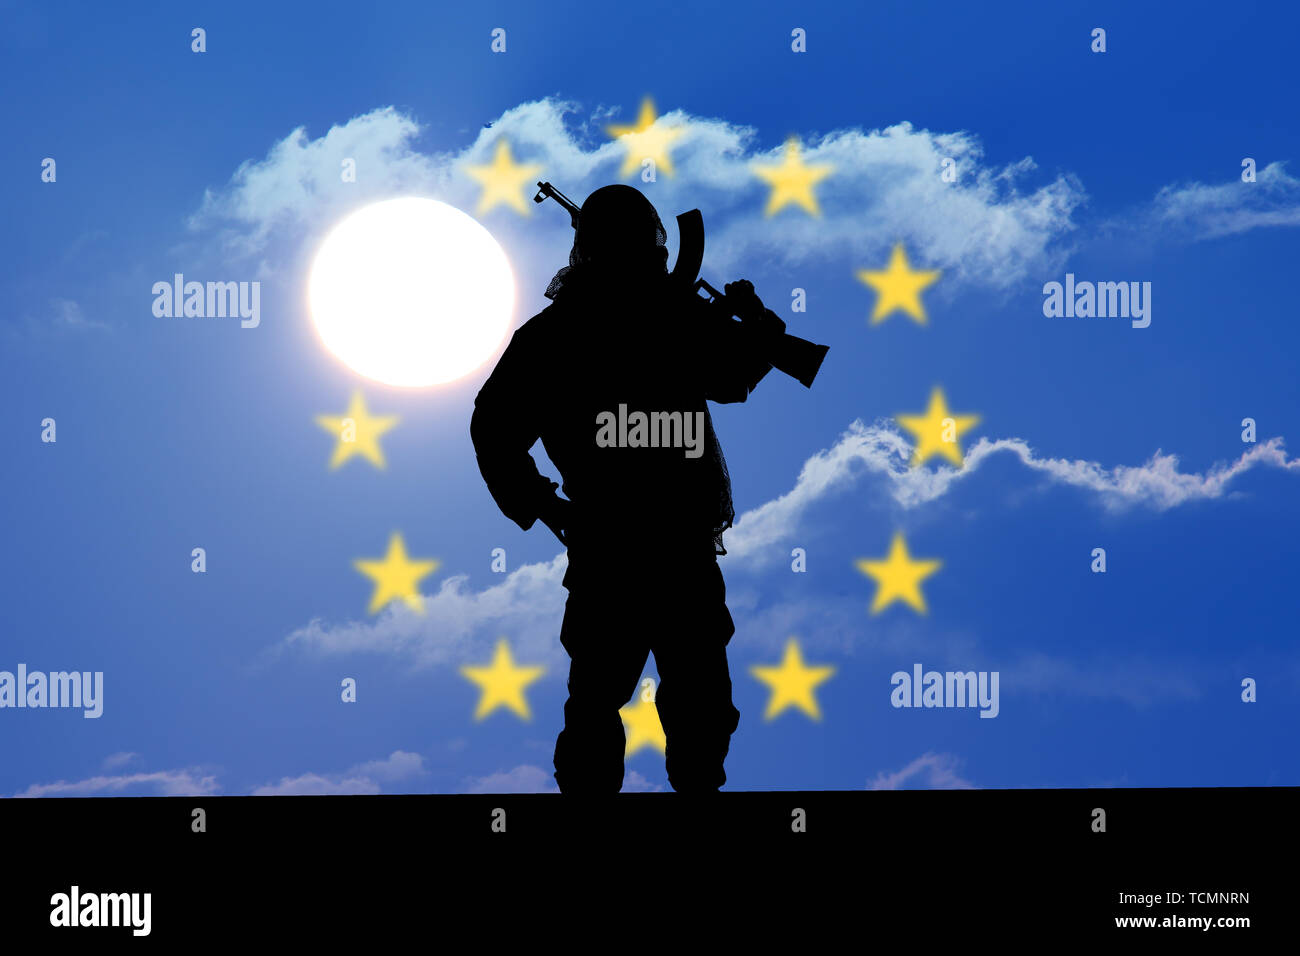 Silhouette of soldier with weapons at sunset. holding gun. Concept of a terrorist. Silhouette terrorists, national flag on background - European Union Stock Photo